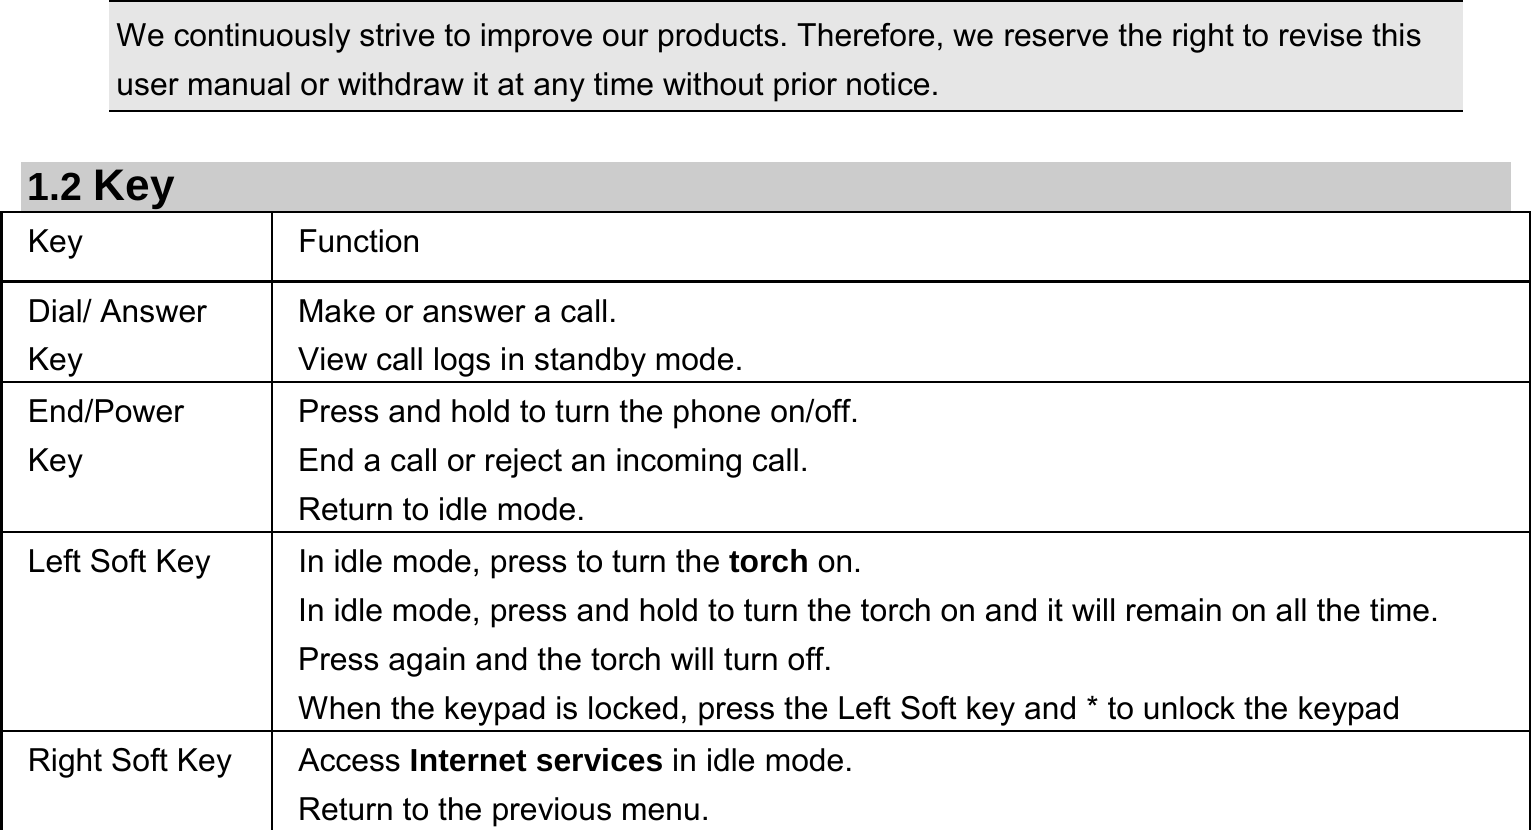    We continuously strive to improve our products. Therefore, we reserve the right to revise this user manual or withdraw it at any time without prior notice.    1.2 Key Key Function  Dial/ Answer Key Make or answer a call. View call logs in standby mode. End/Power Key Press and hold to turn the phone on/off. End a call or reject an incoming call. Return to idle mode. Left Soft Key  In idle mode, press to turn the torch on. In idle mode, press and hold to turn the torch on and it will remain on all the time. Press again and the torch will turn off. When the keypad is locked, press the Left Soft key and * to unlock the keypad Right Soft Key  Access Internet services in idle mode.   Return to the previous menu.   